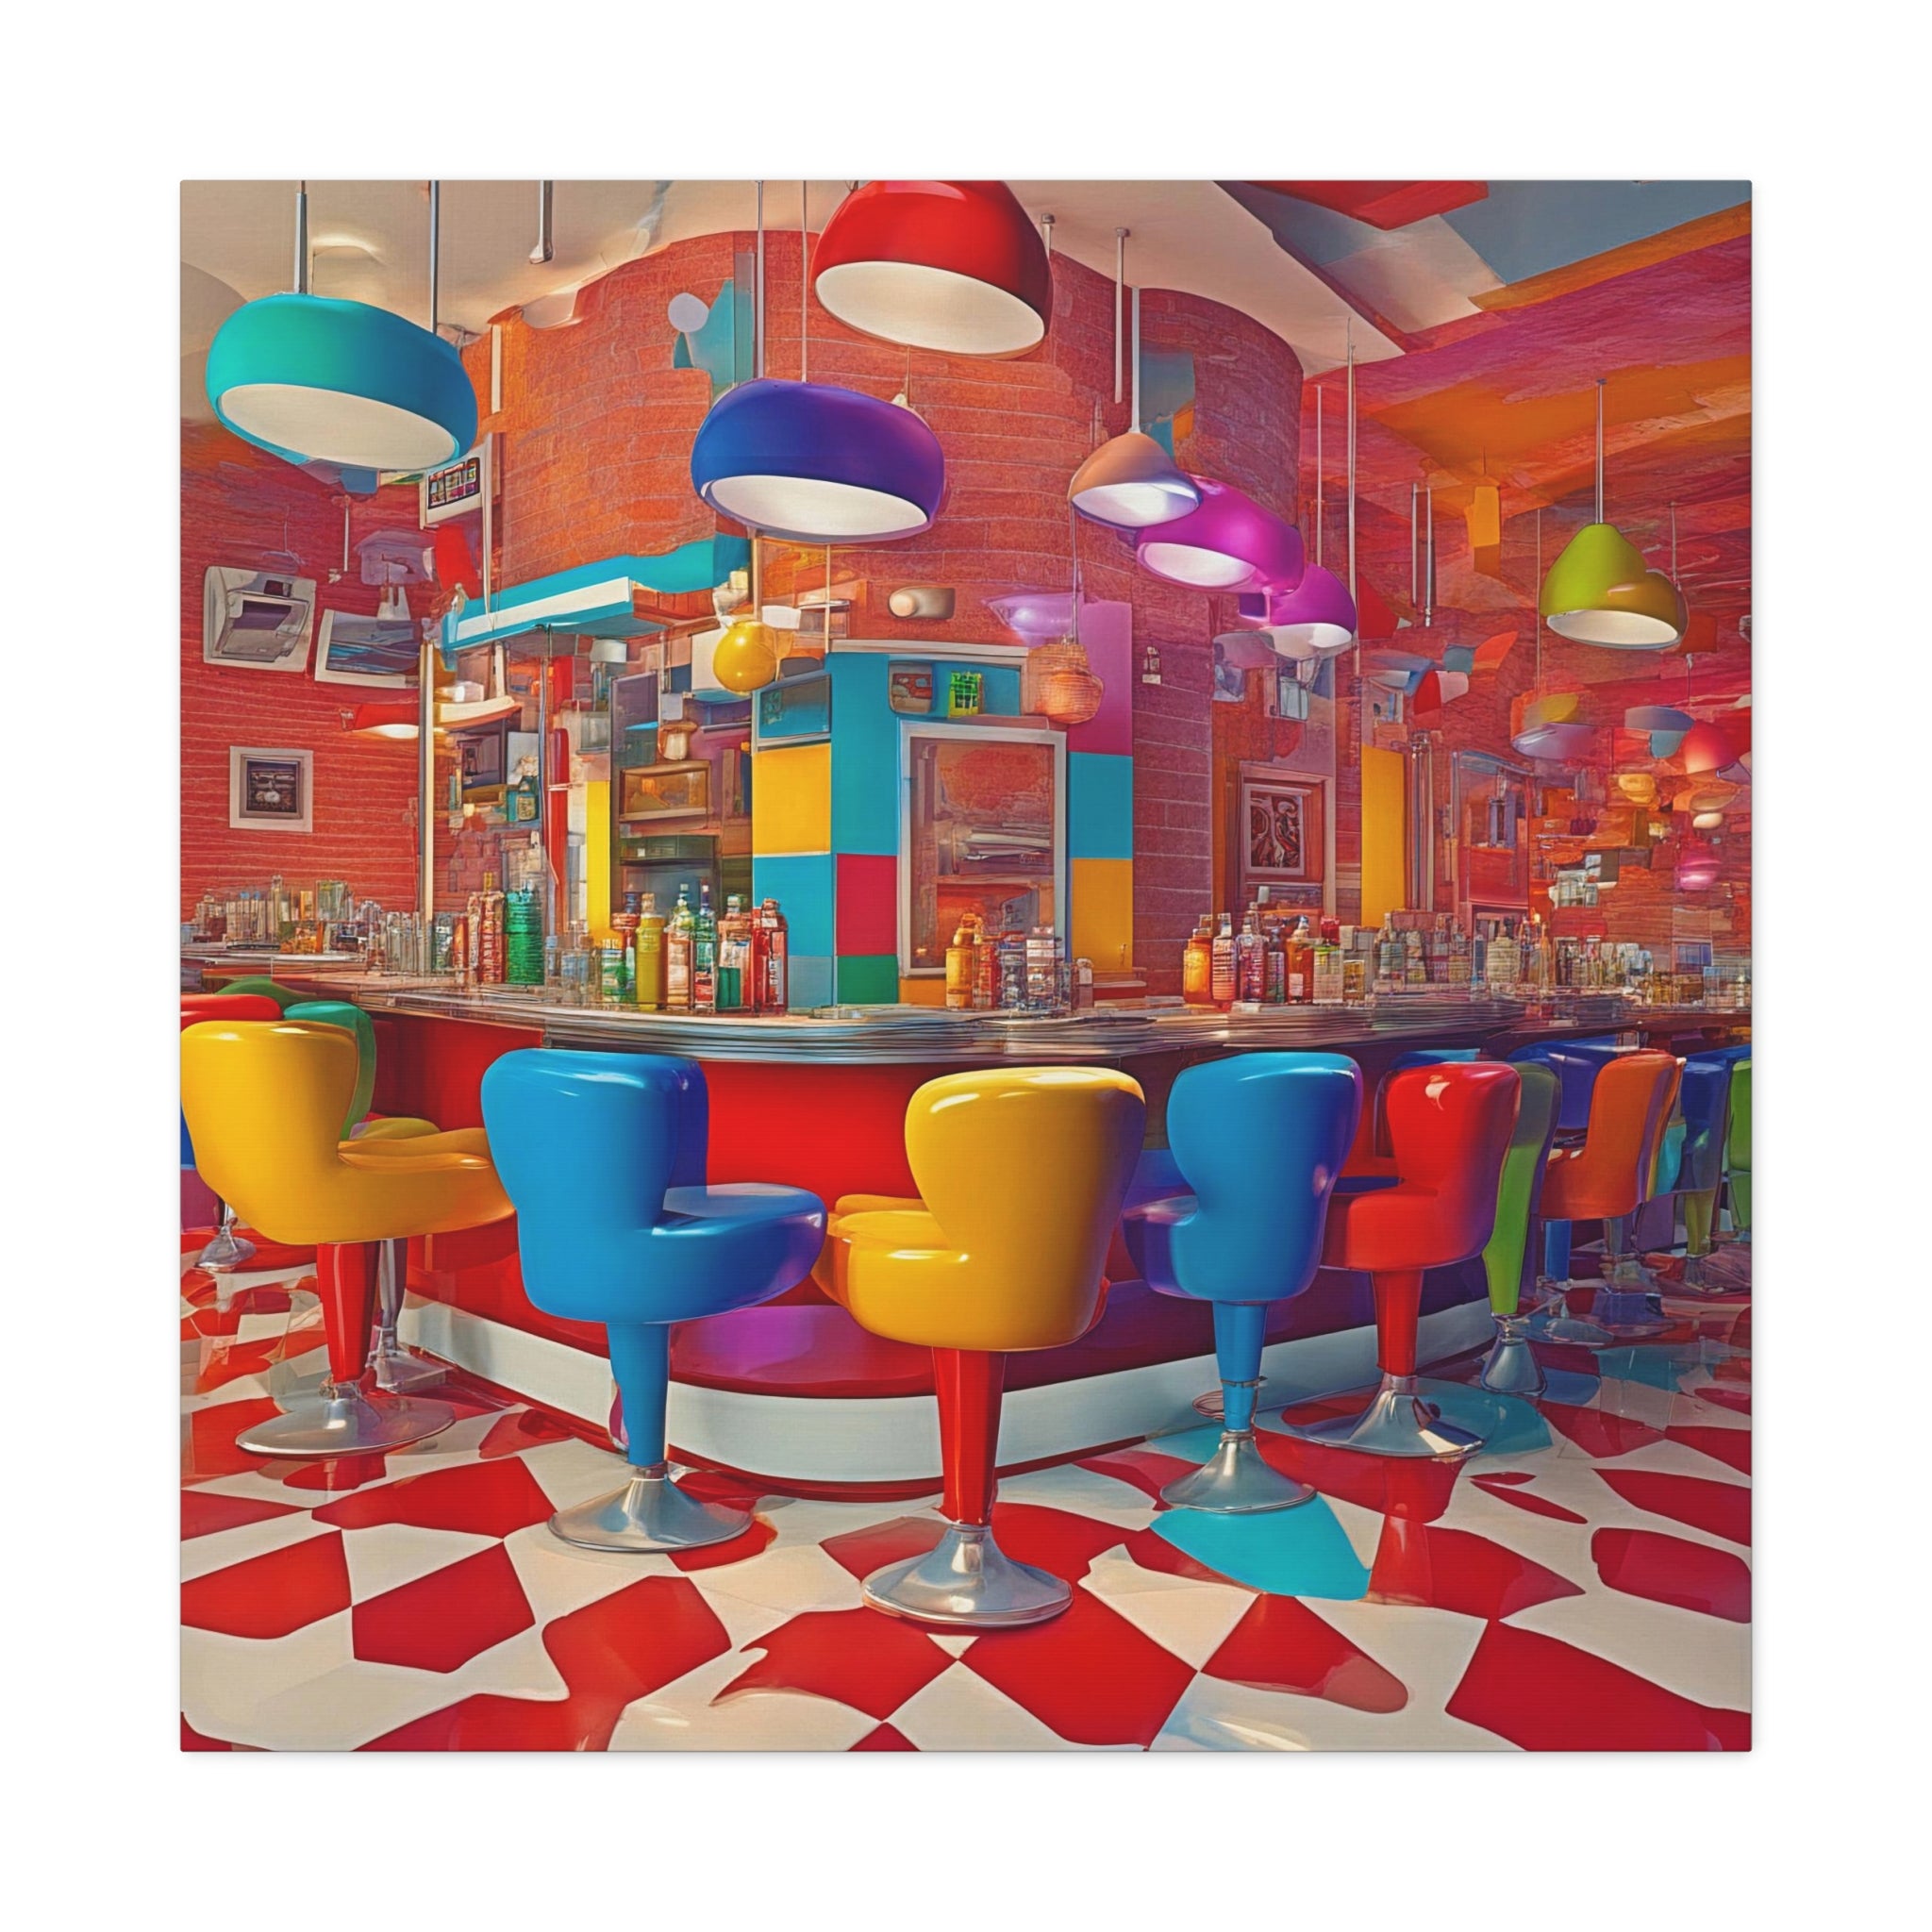 Wall Art DINER Canvas Print Painting Giclee 32x32 Gallery Wrap Love Pop Art Beauty Fun Design House Home Office Decor Gift Ready to Hang